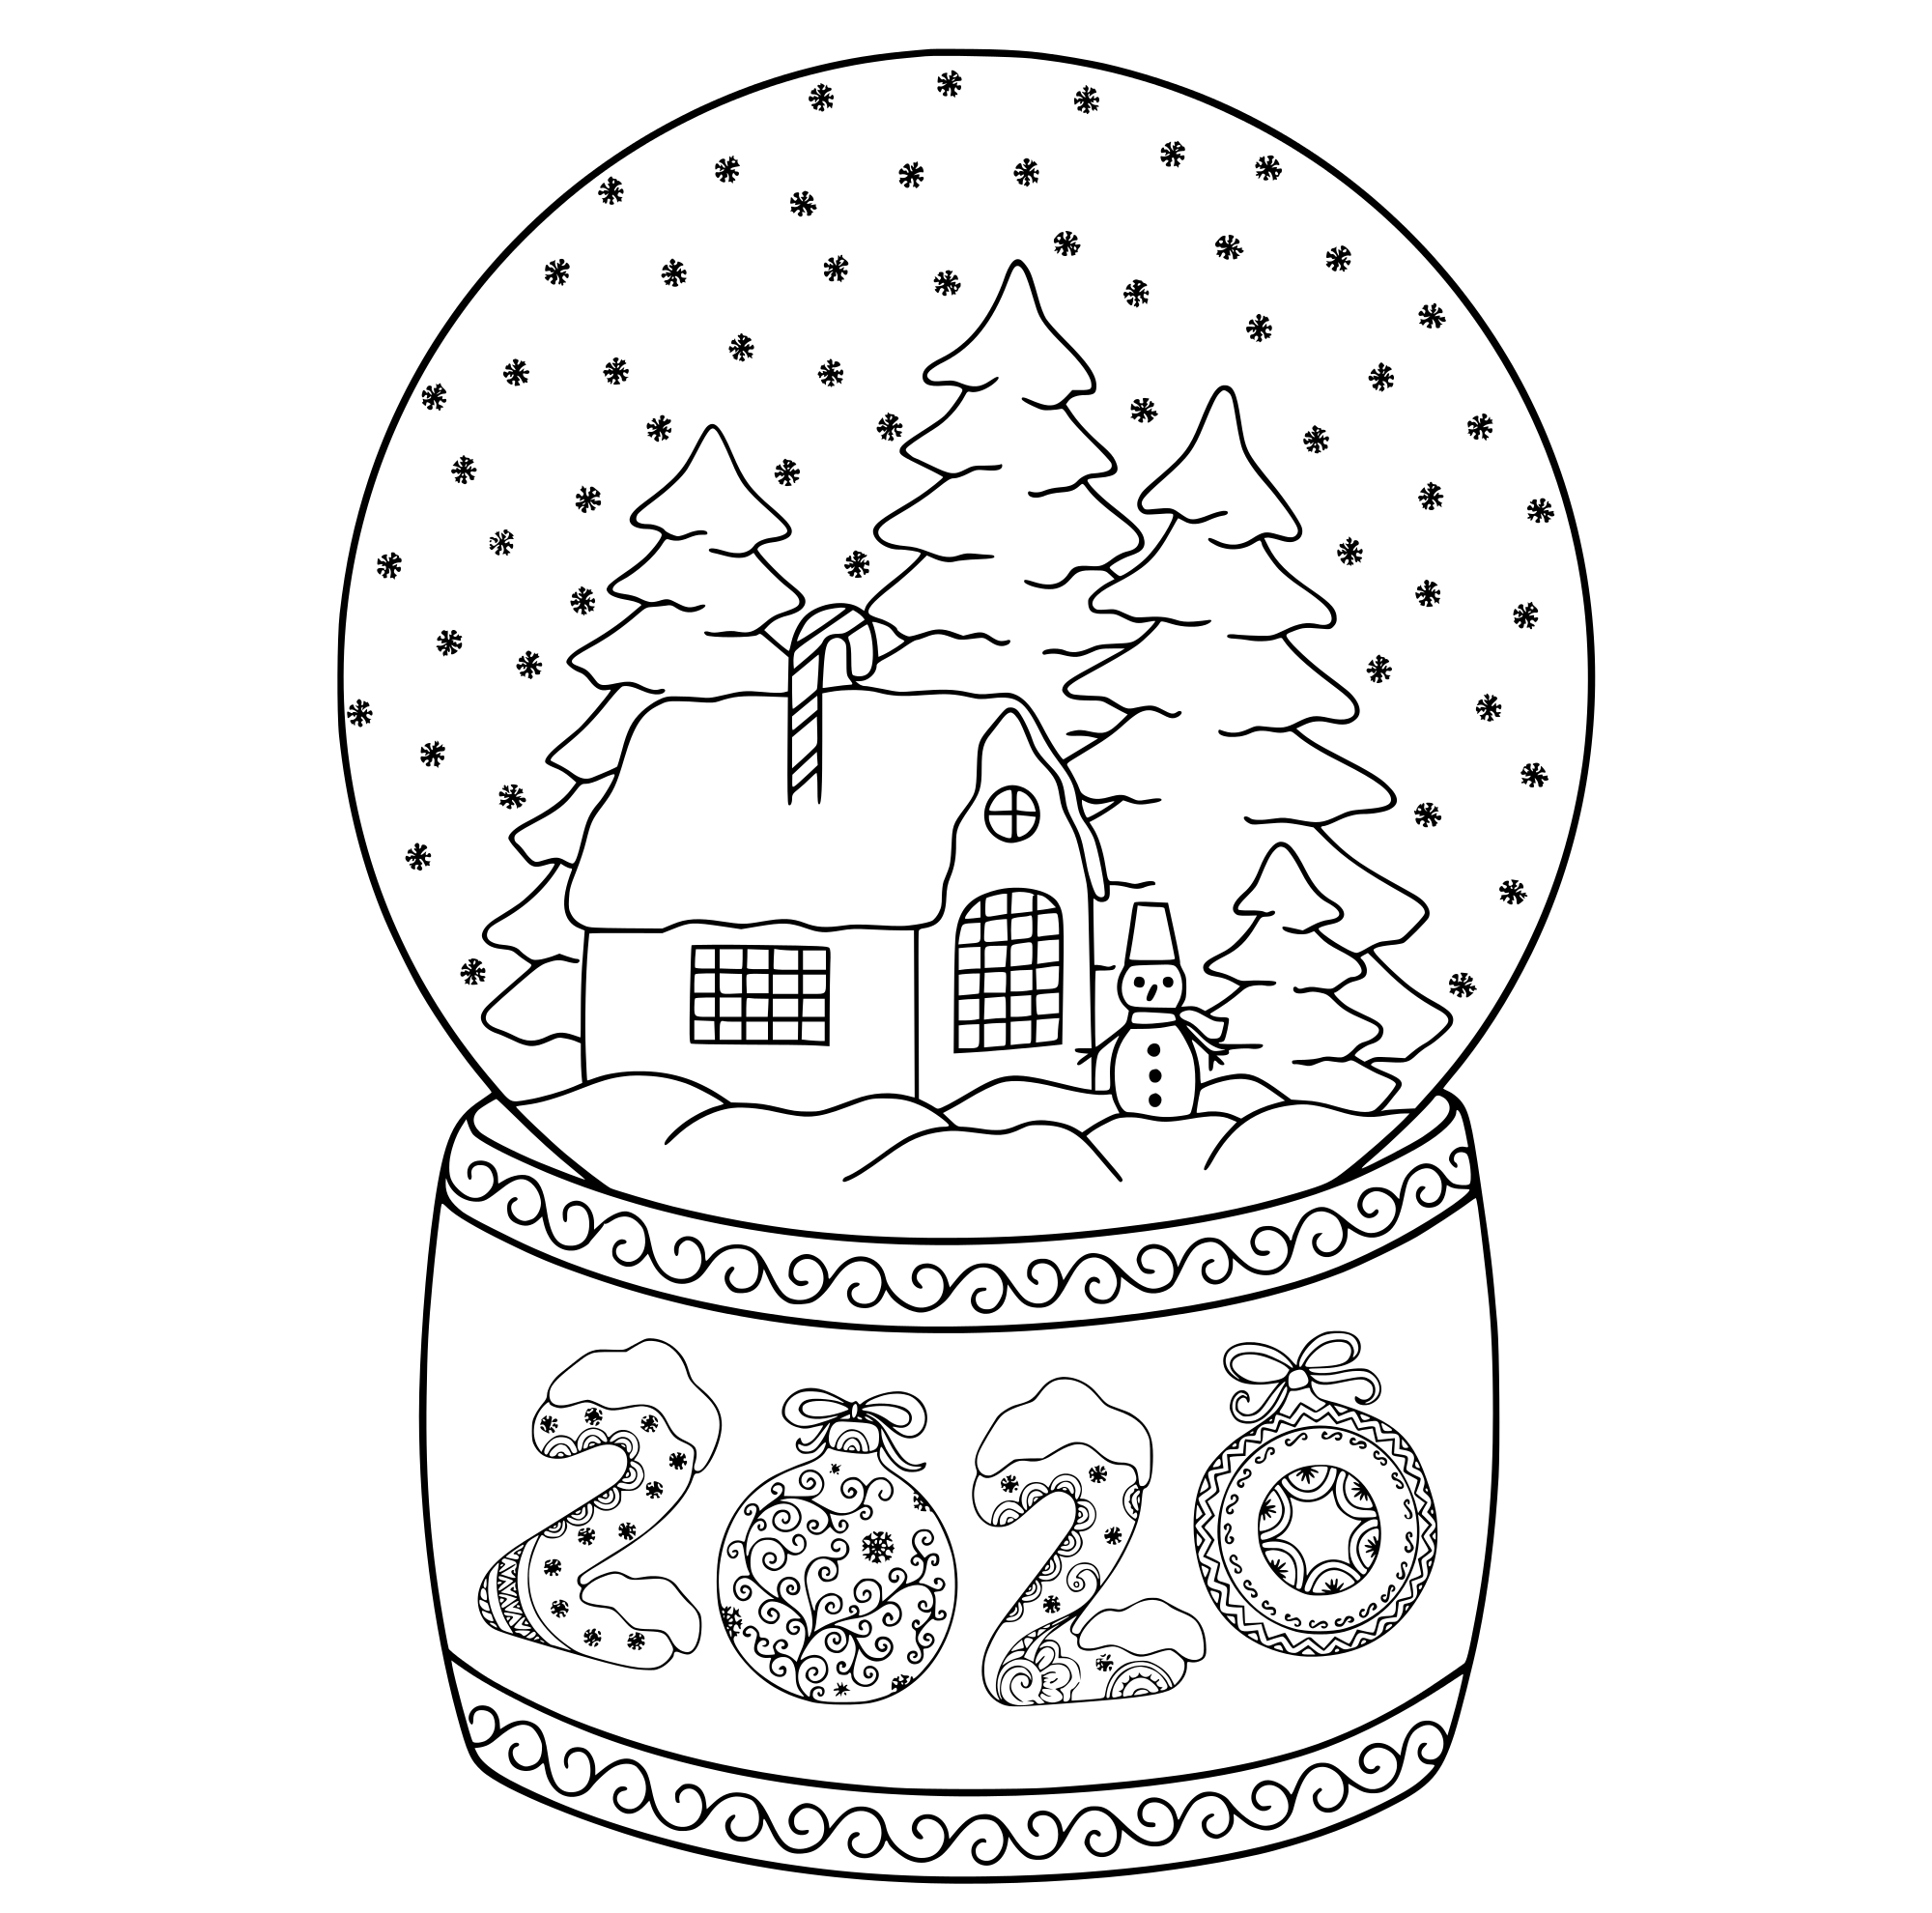 2020 Toy Glass Snow Globe House Coloring Page